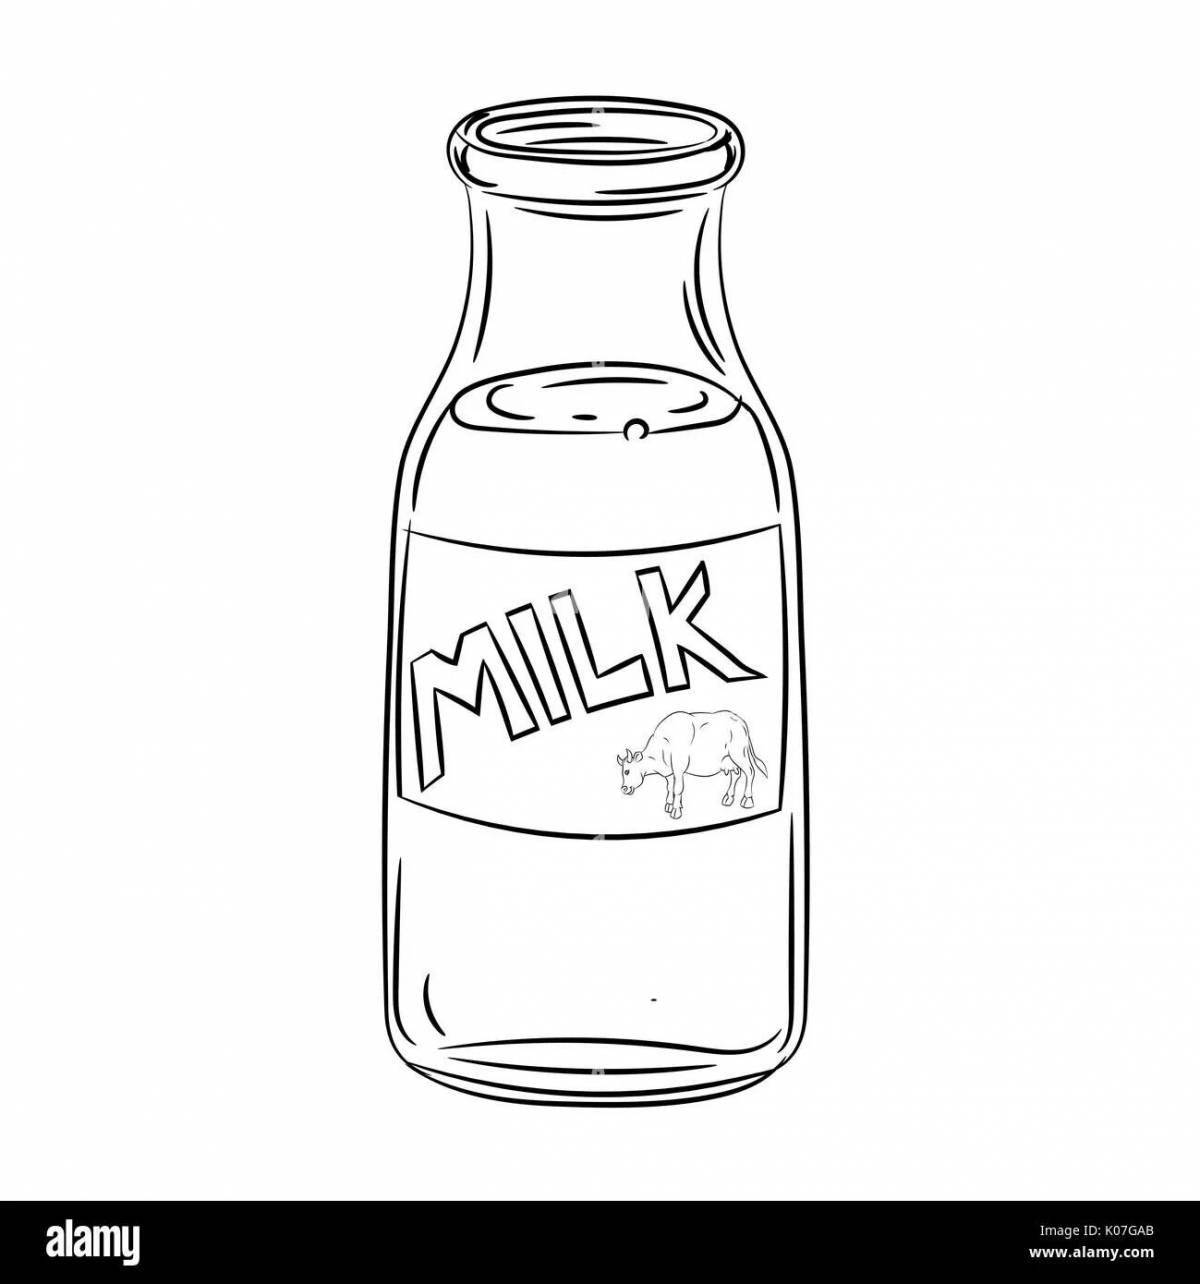 Colourful milk bottle coloring page